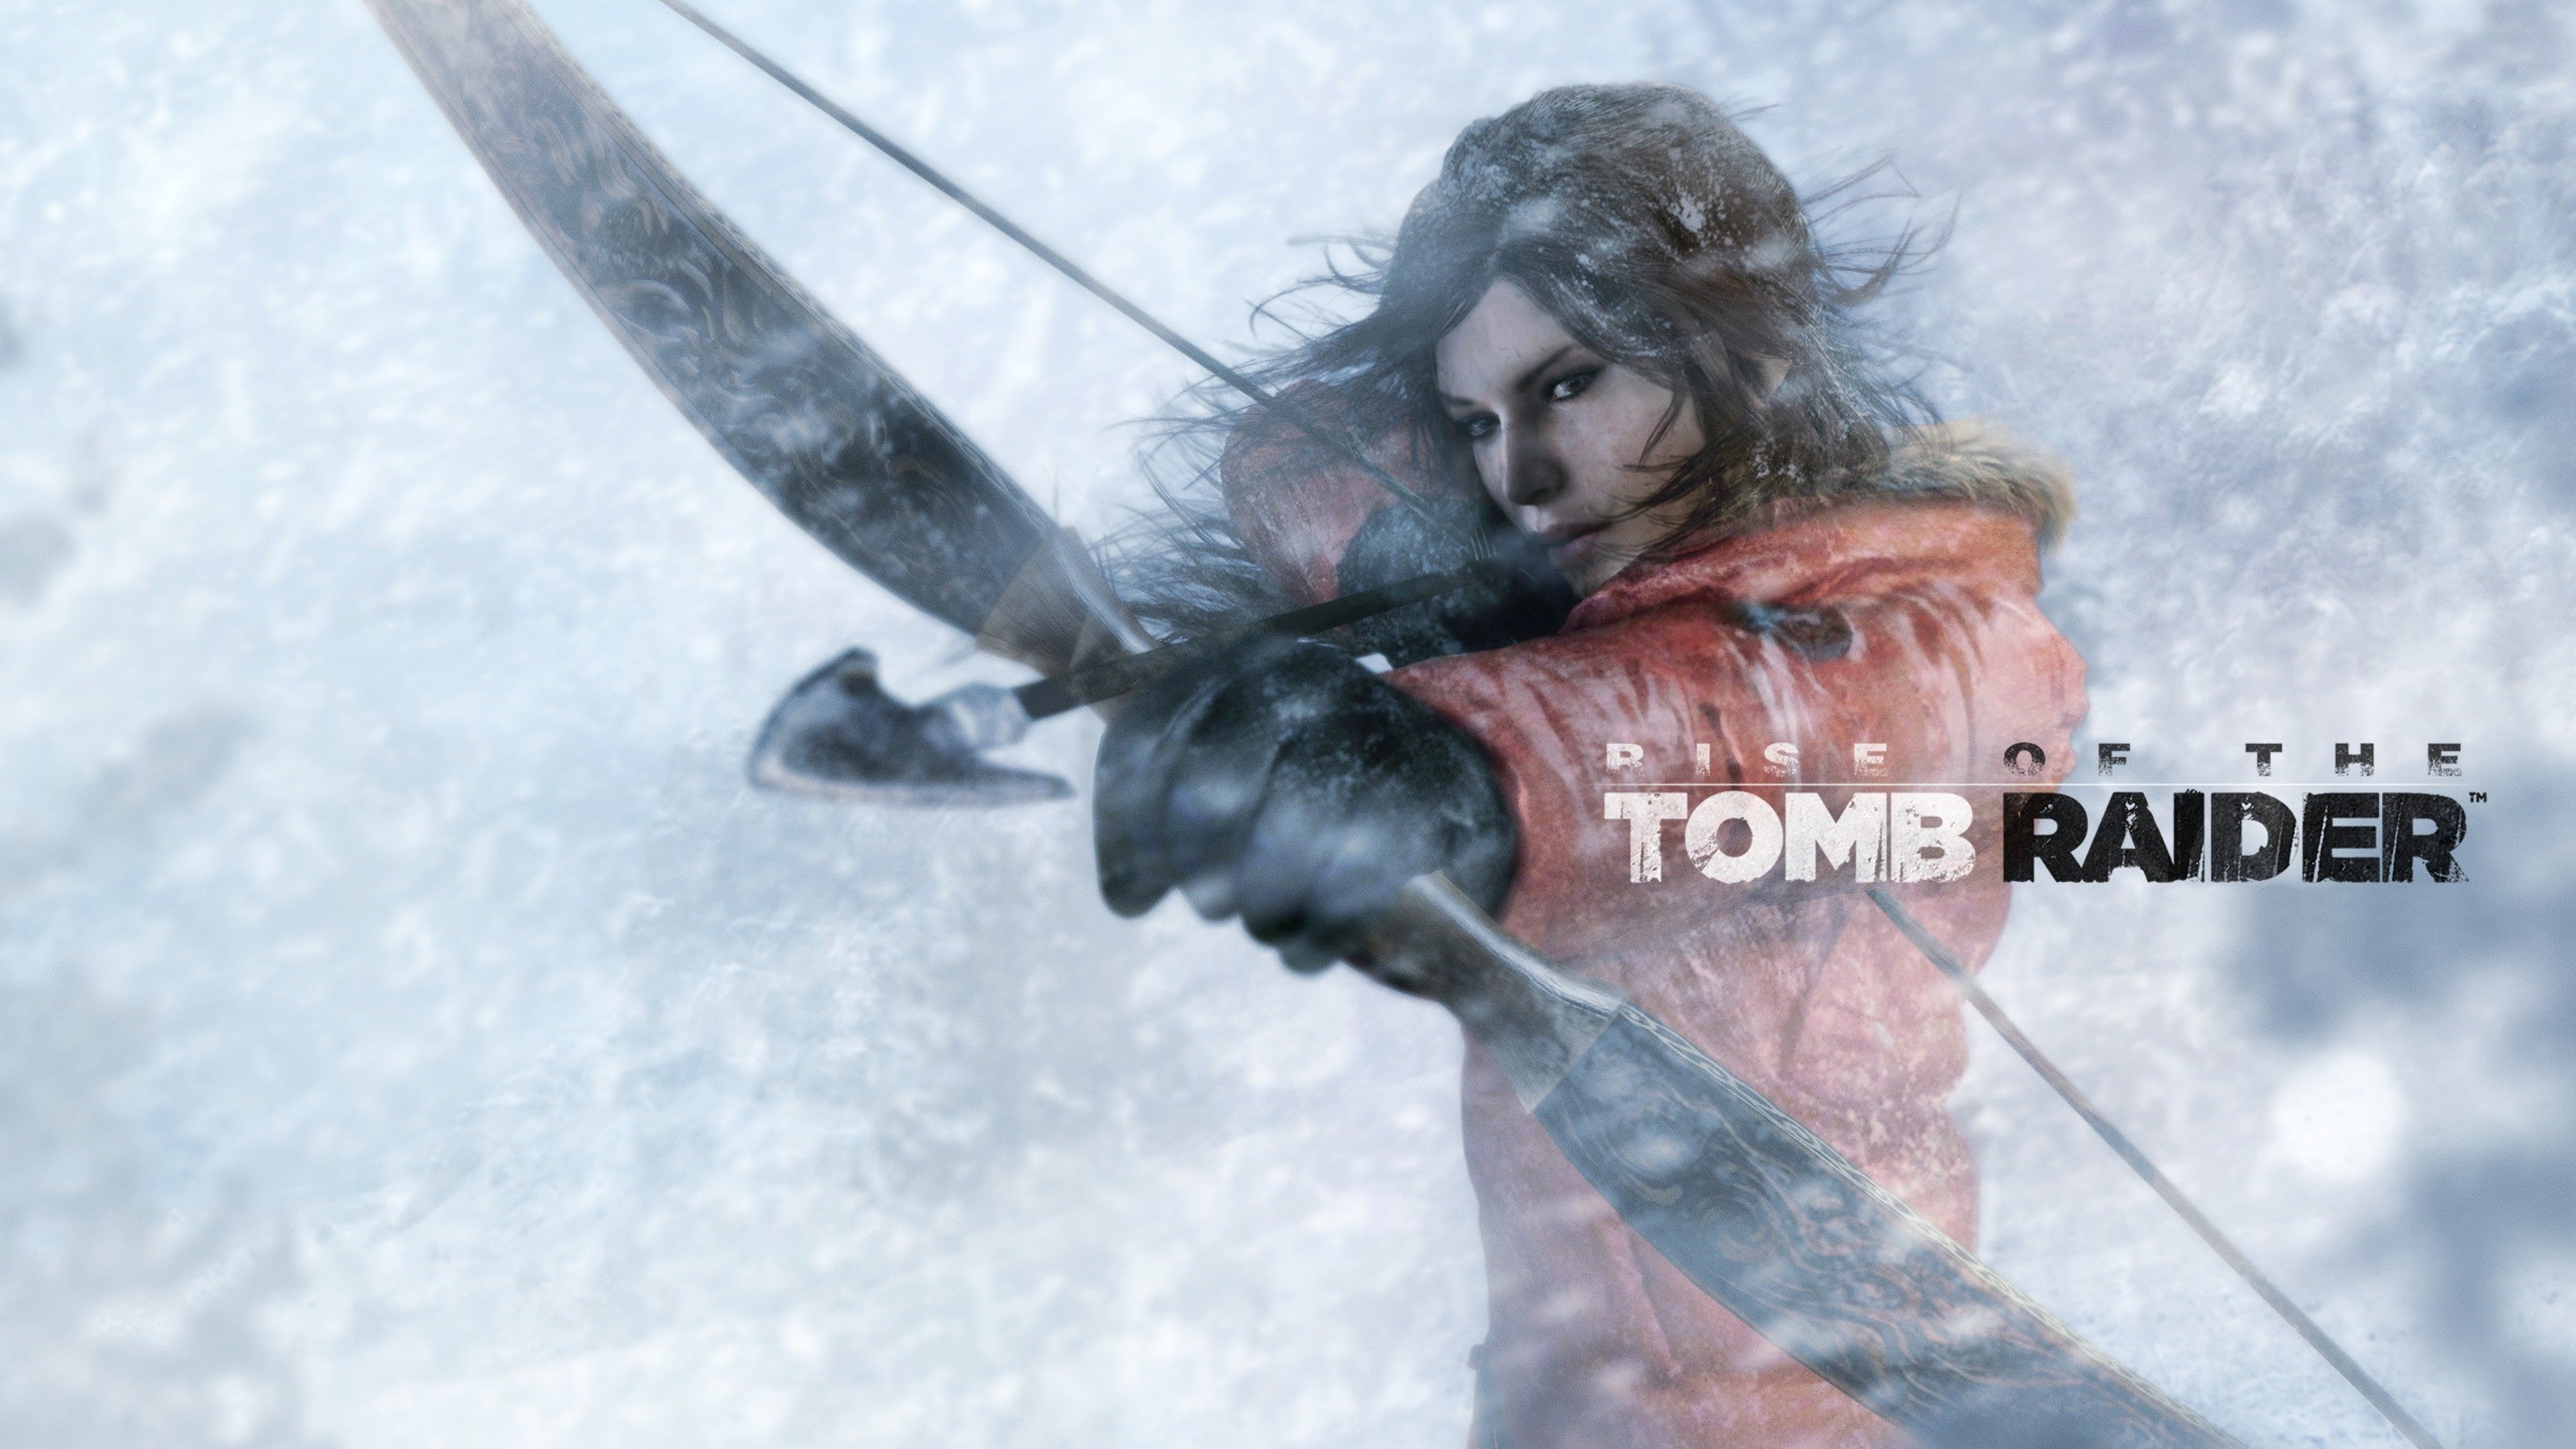 Rise of the Tomb Raider - On My Own [GMV]